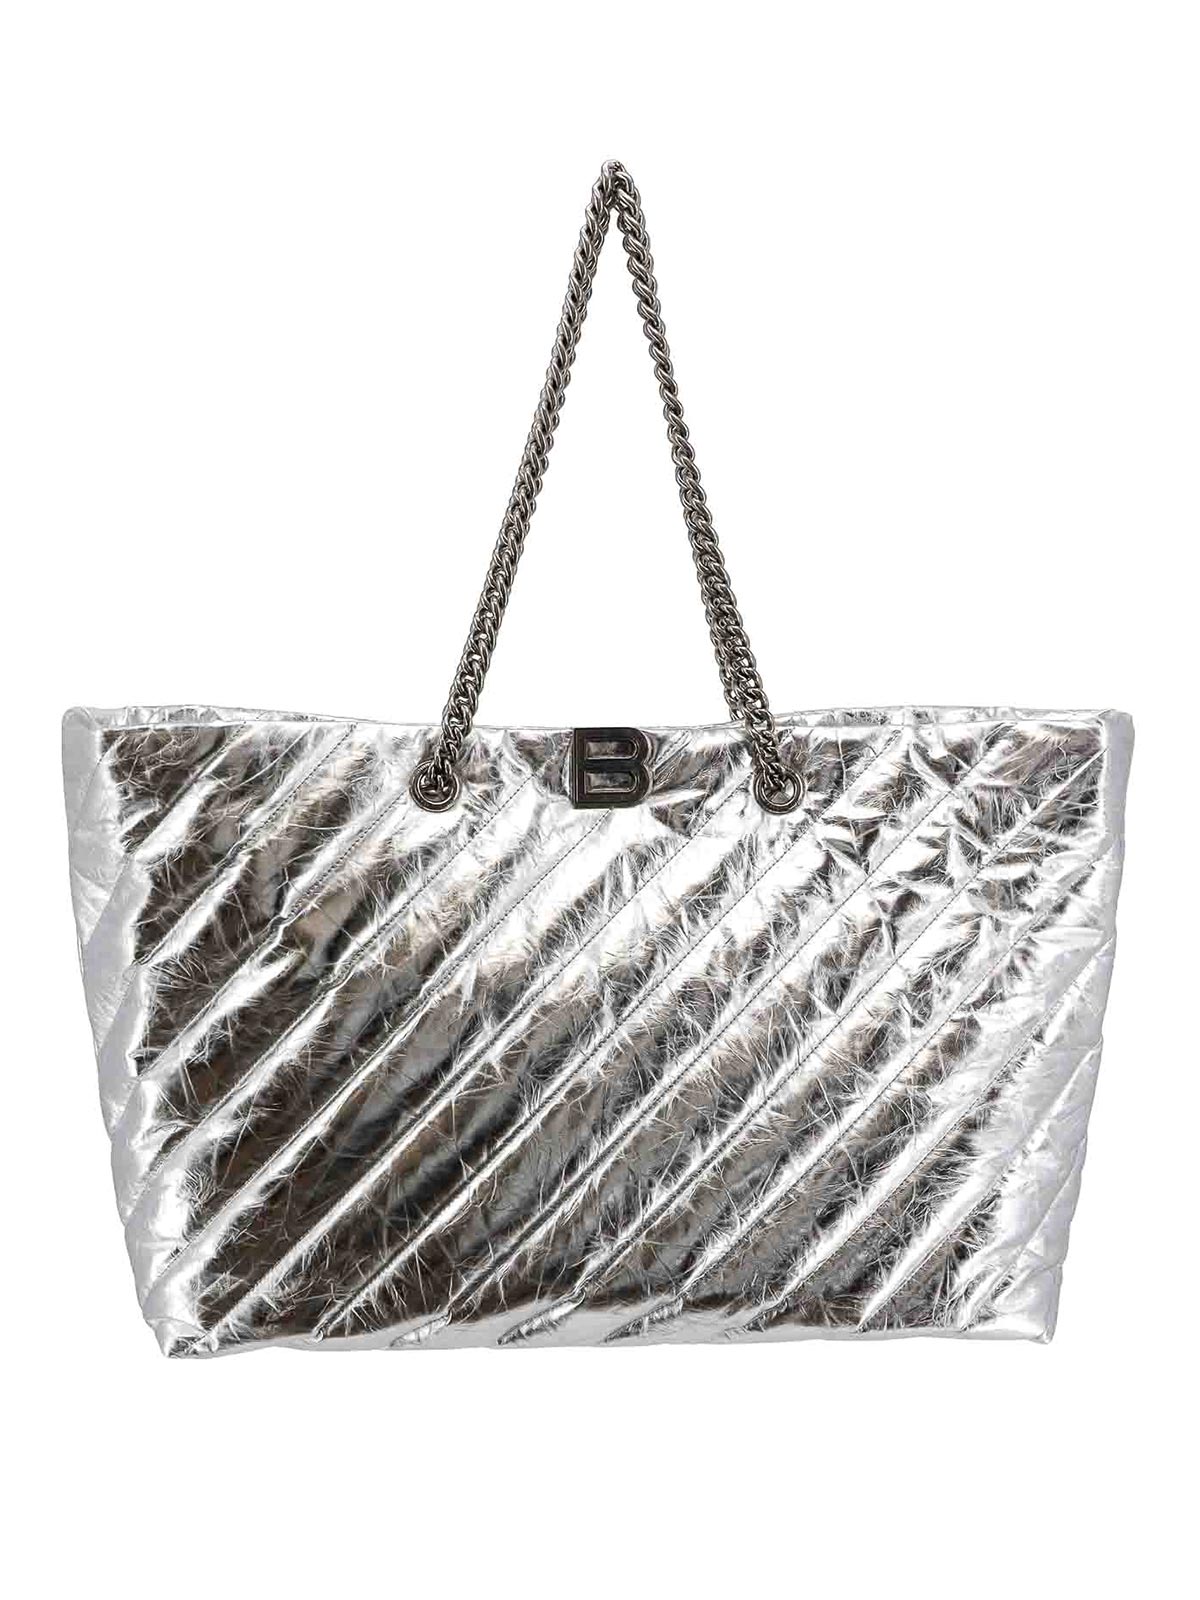 Balenciaga Quilted Leather Bag Frontal Monogram In Metallic